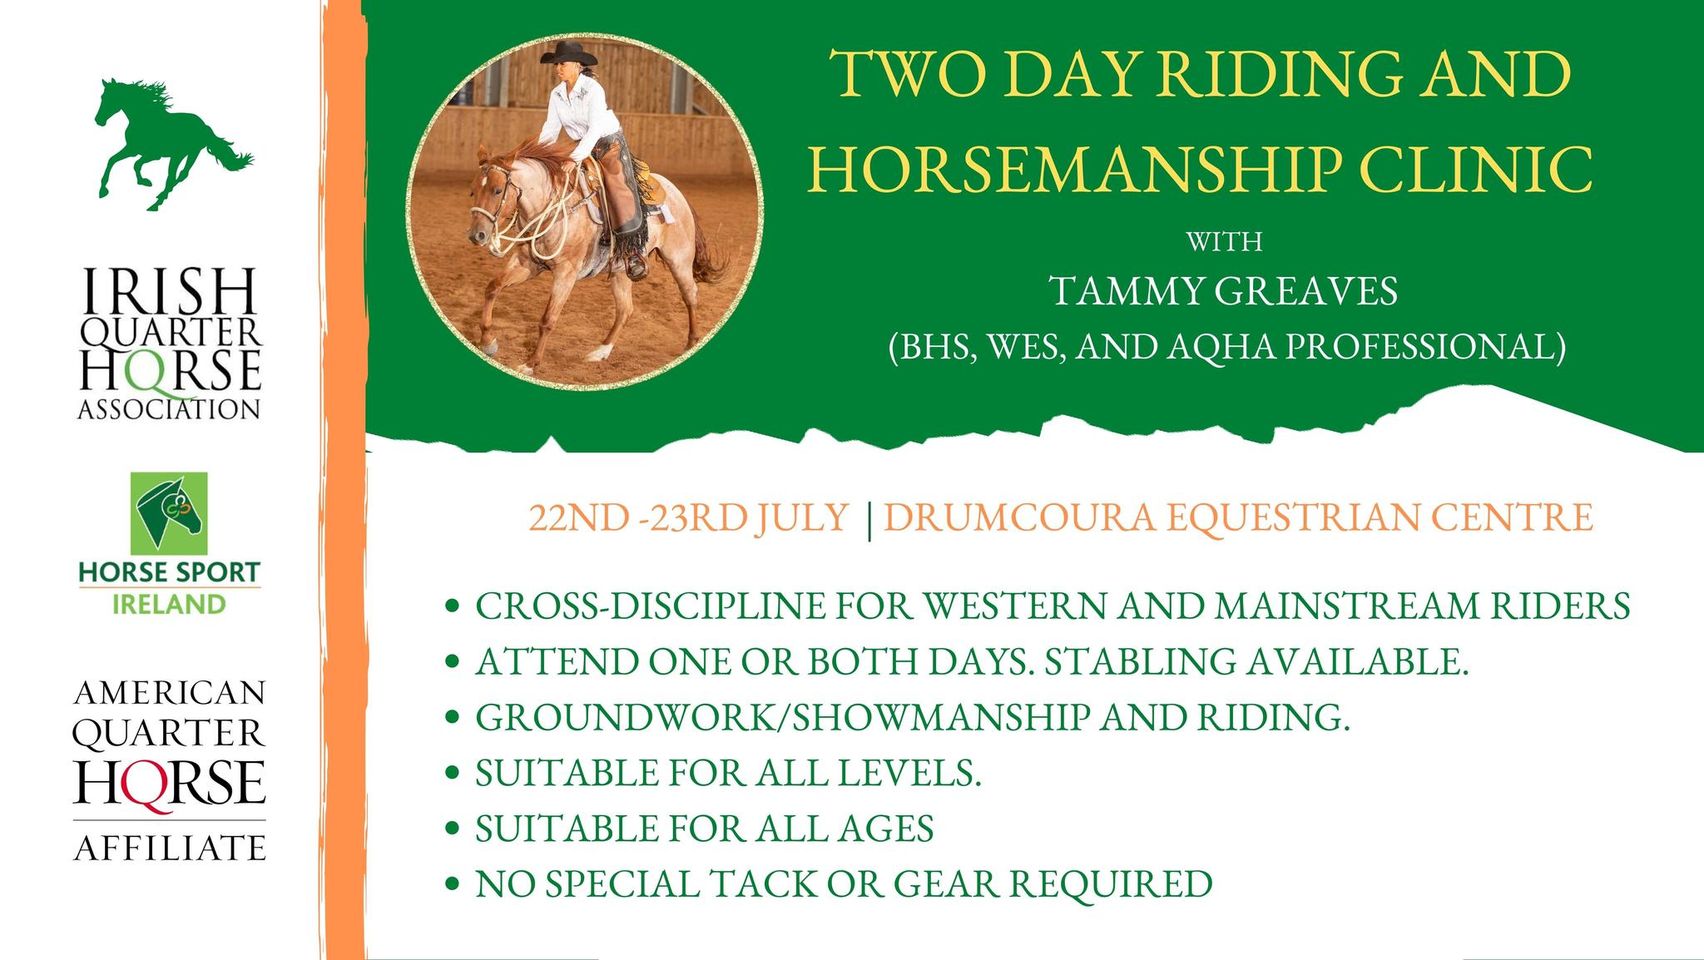 Two Day Horsemanship and Riding Clinic with Tammy Greaves